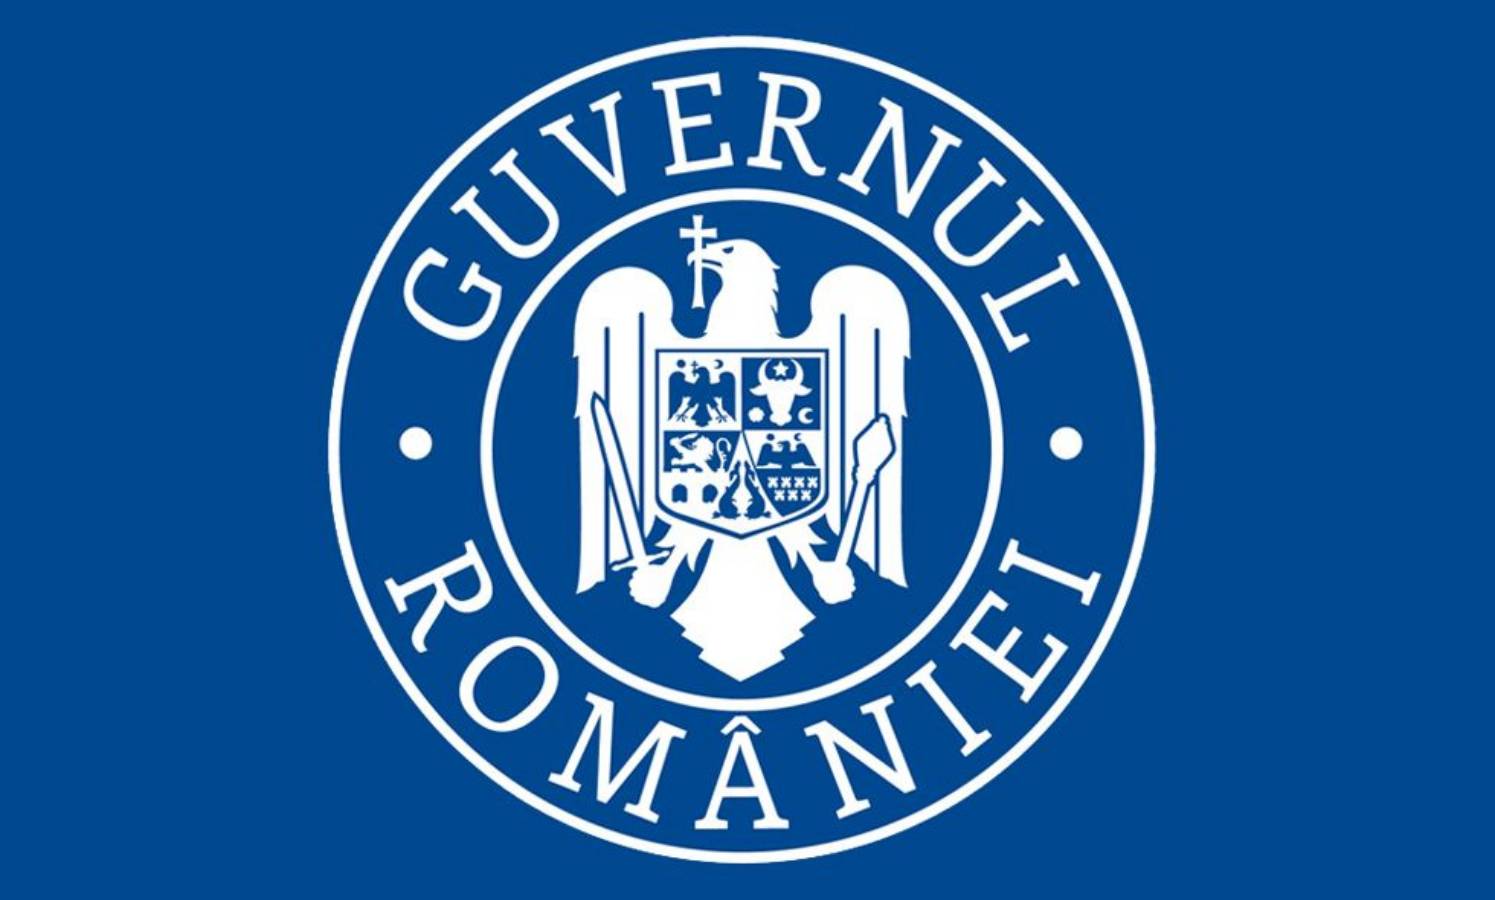 The Romanian government quarantines the locality on alert